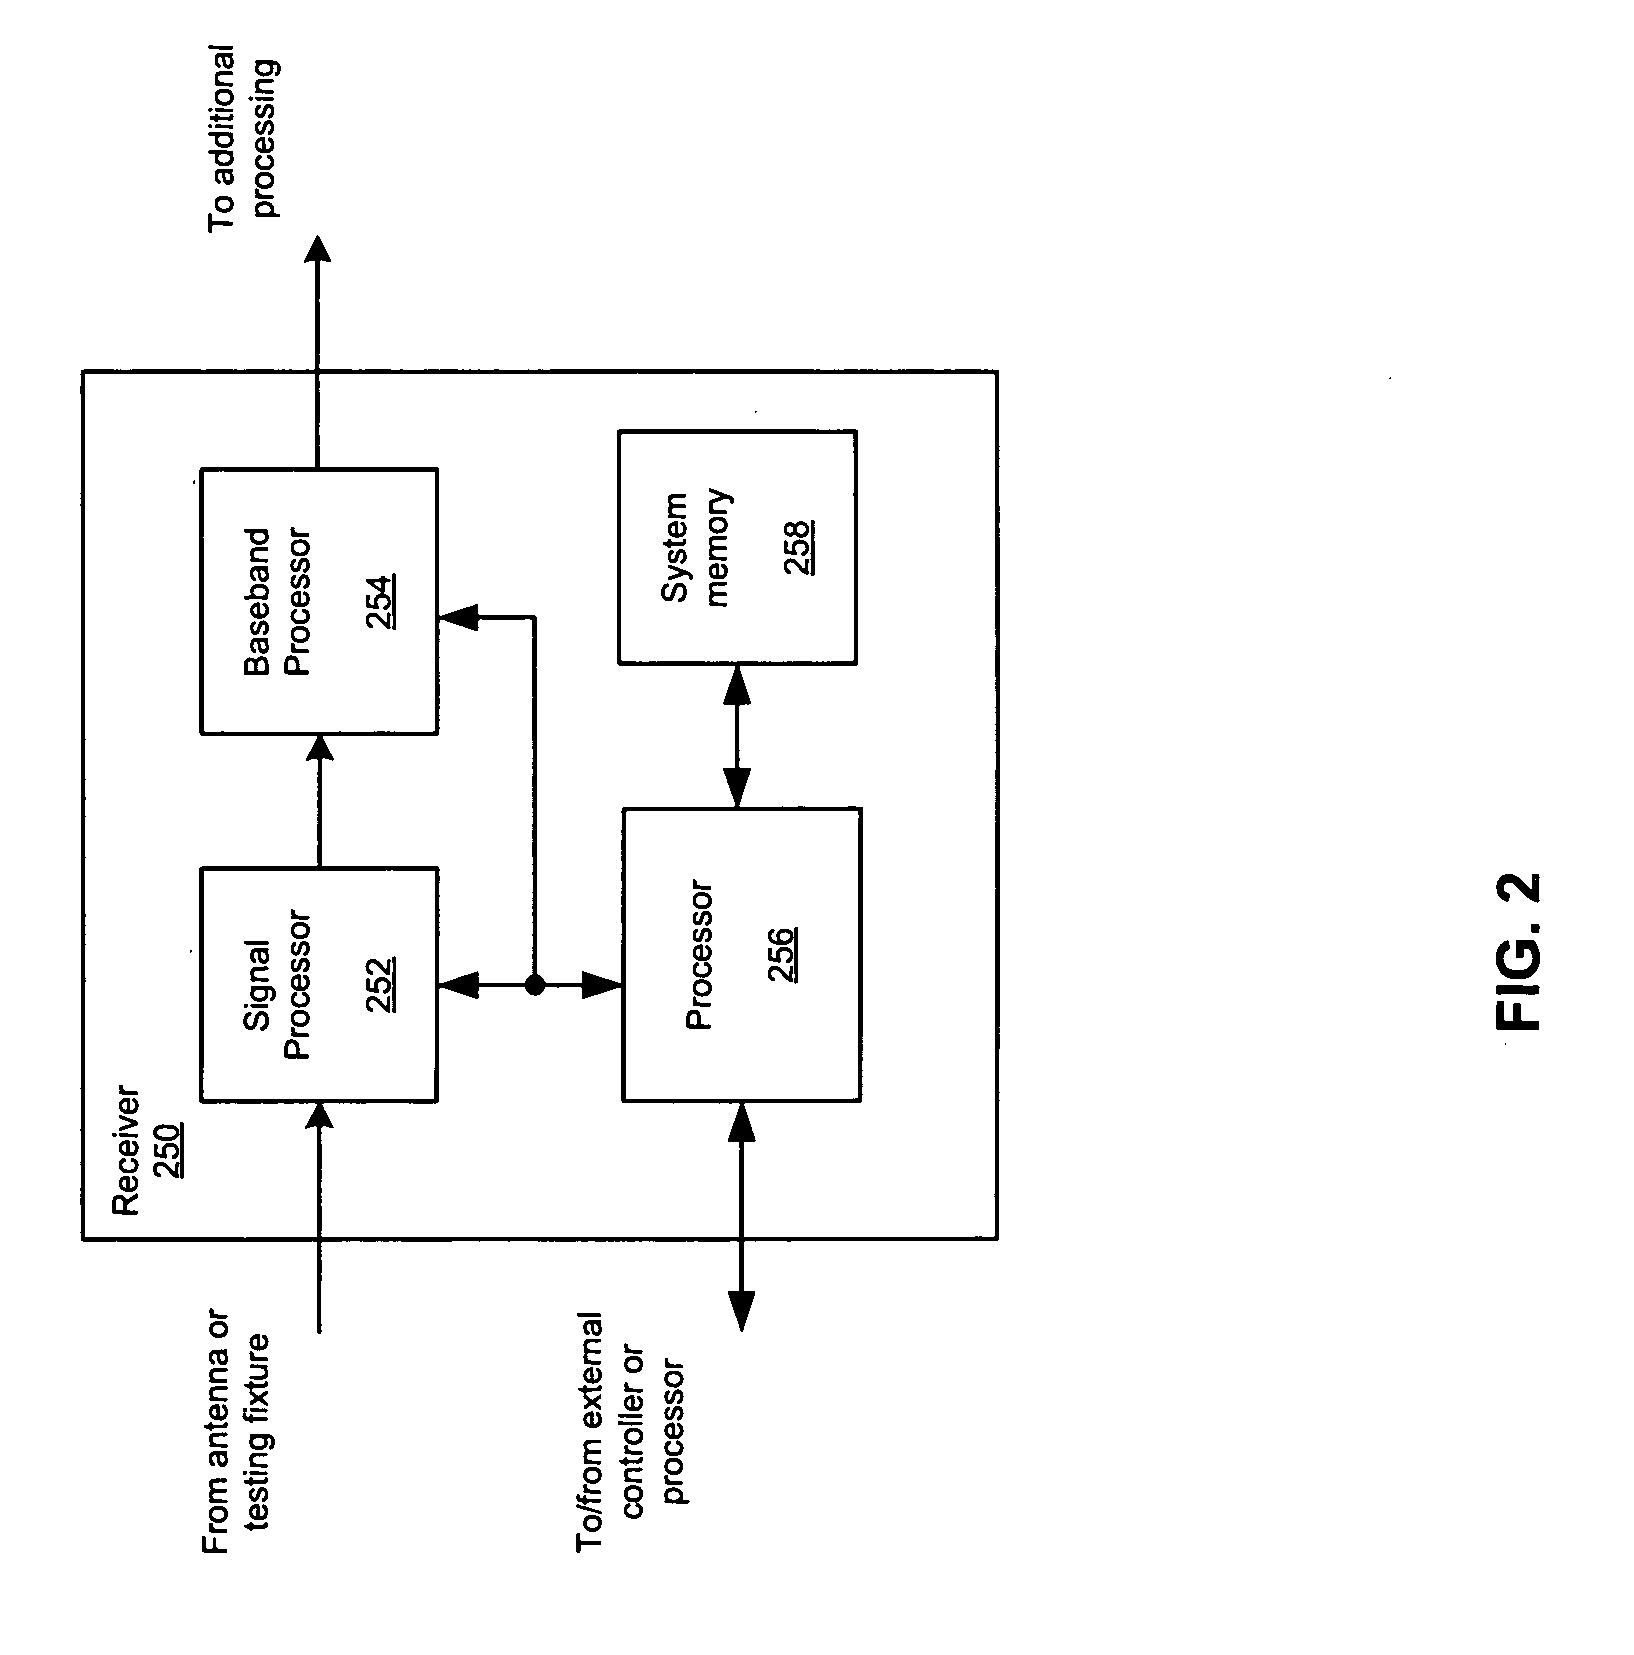 Method and apparatus for efficient gold code generation and management in WCDMA systems